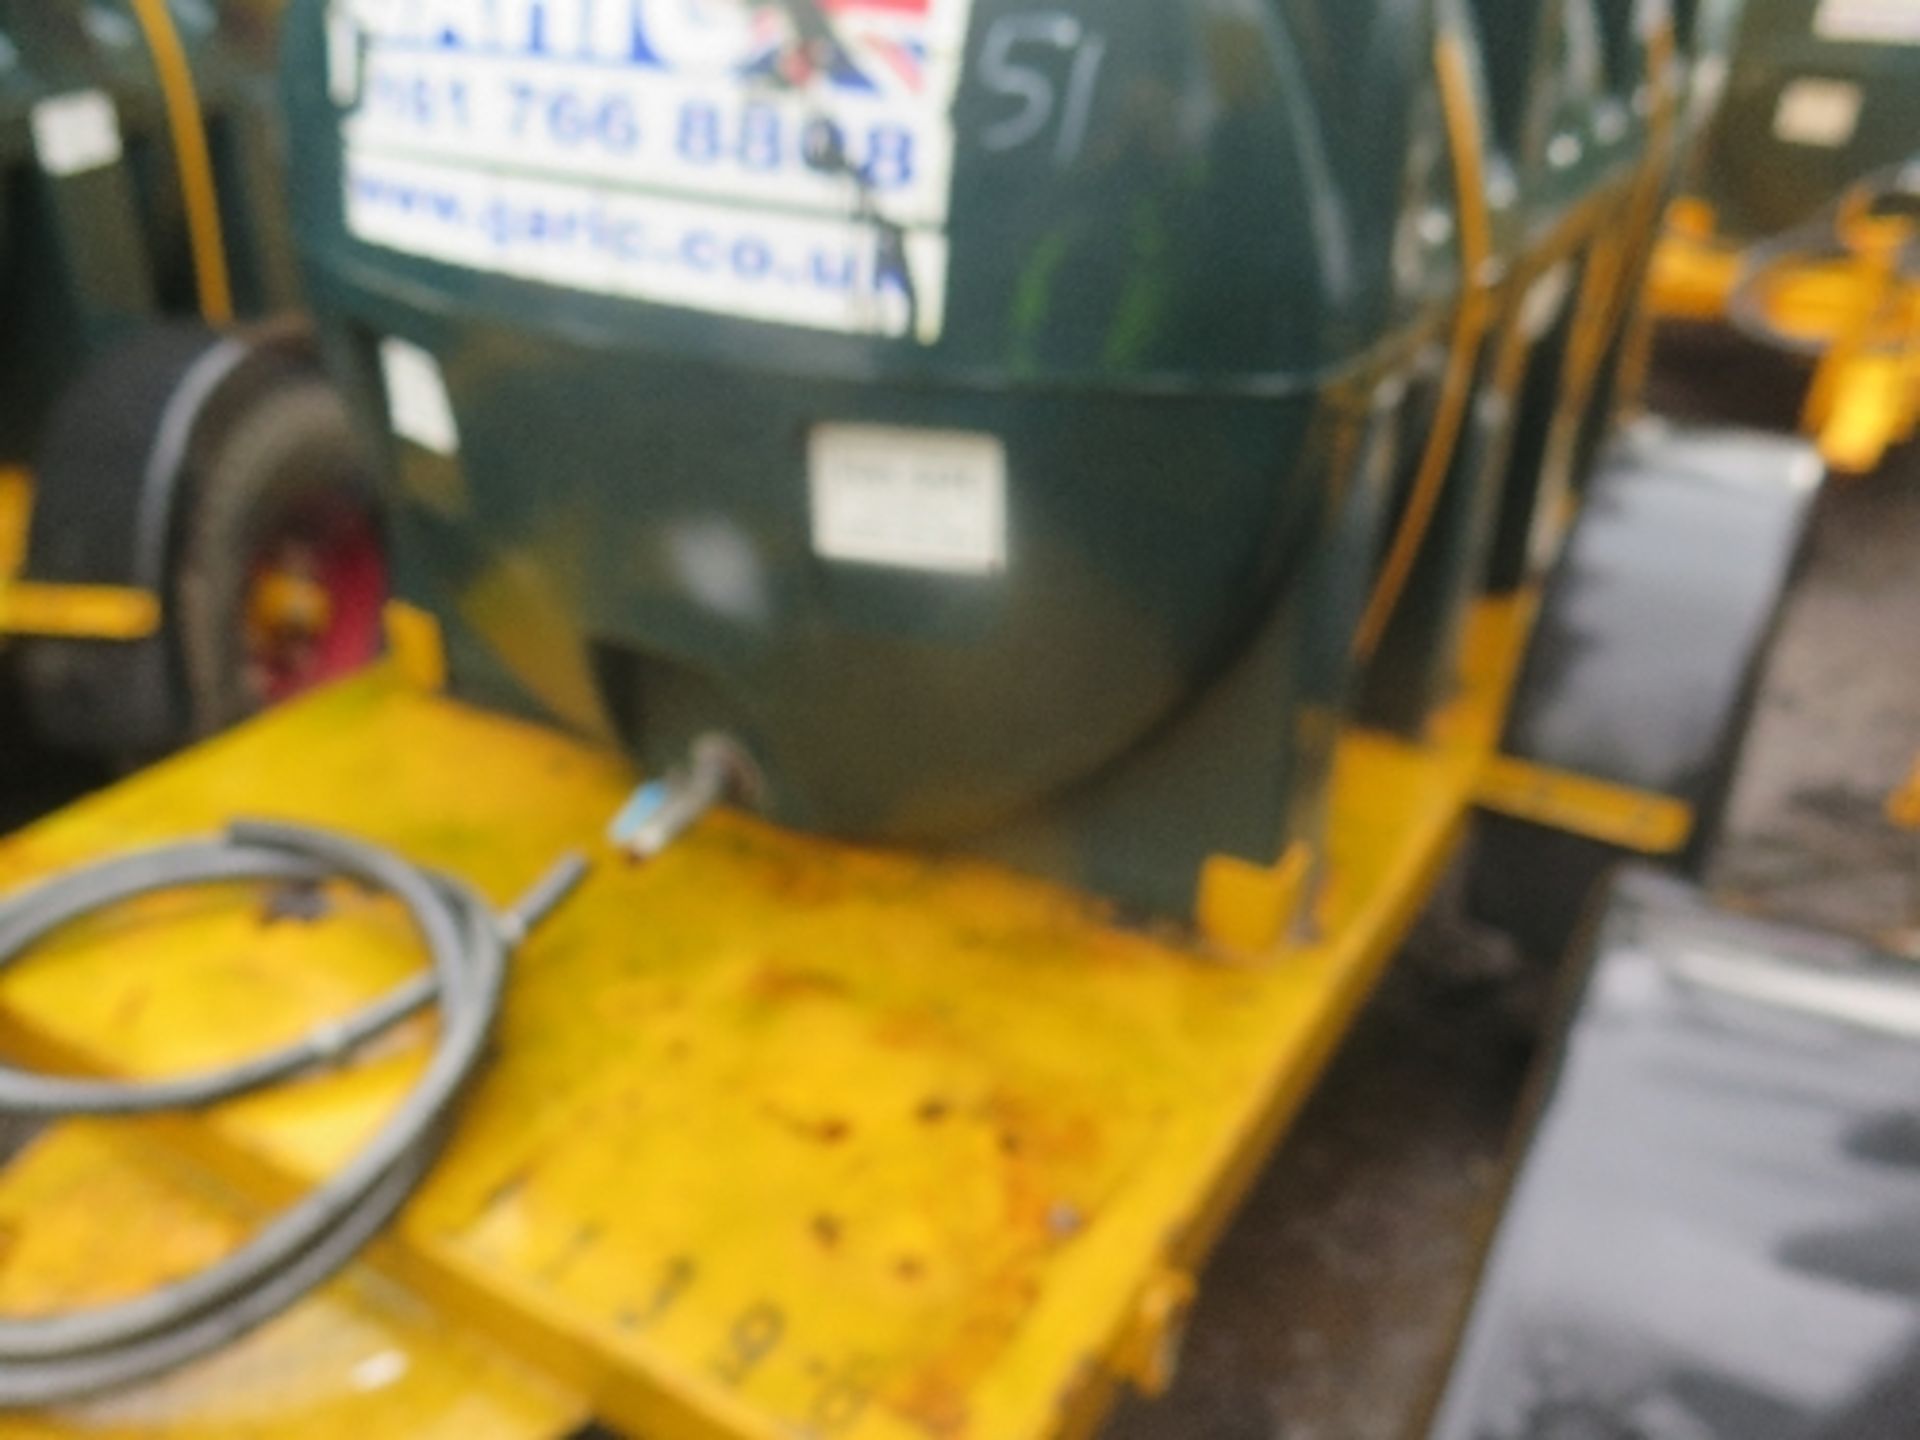 500 gallon site water bowser (11398) - Image 2 of 2